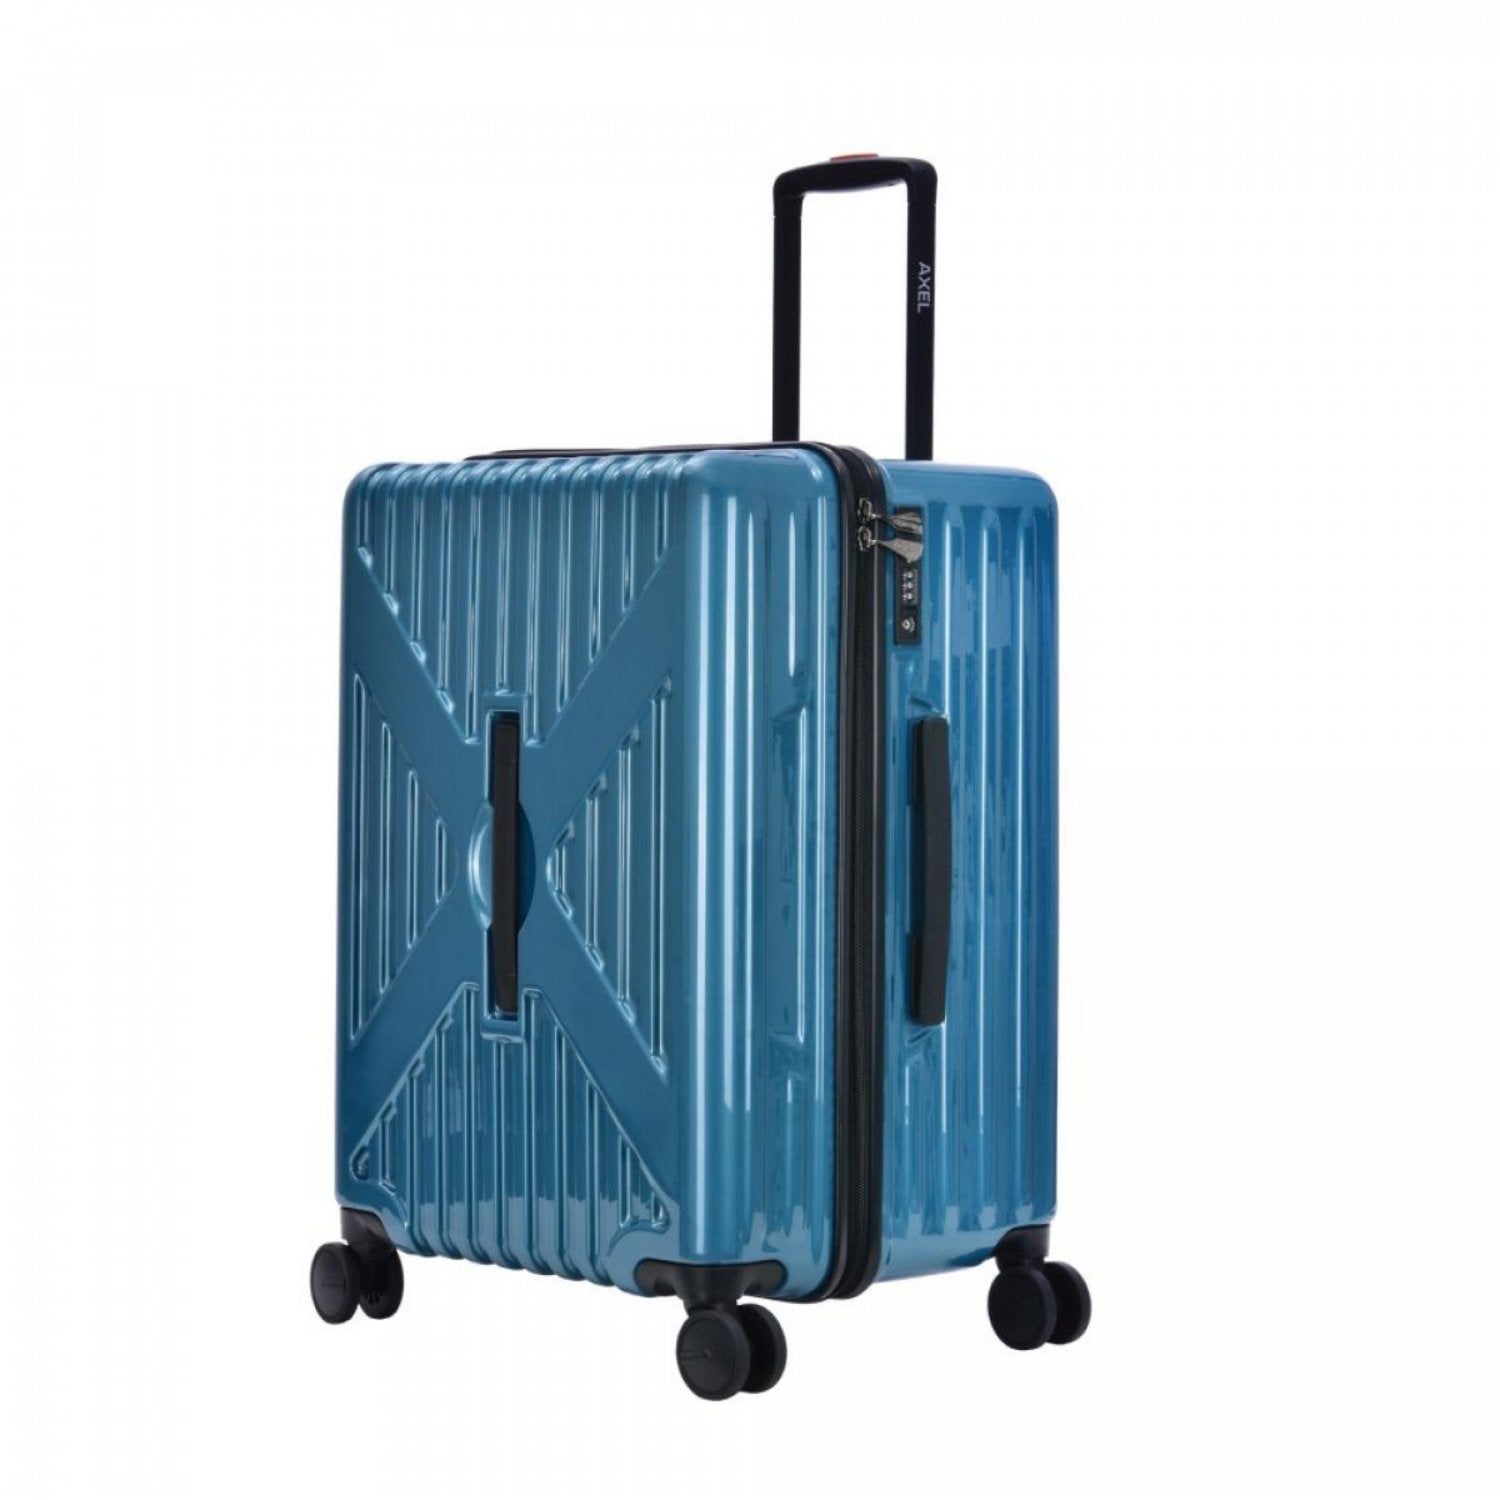 Lushberry Axel Collection Lakeblue Cabin - MOON - Luggage - Lushberry - Lushberry Axel Collection Lakeblue Cabin - Luggage - 4